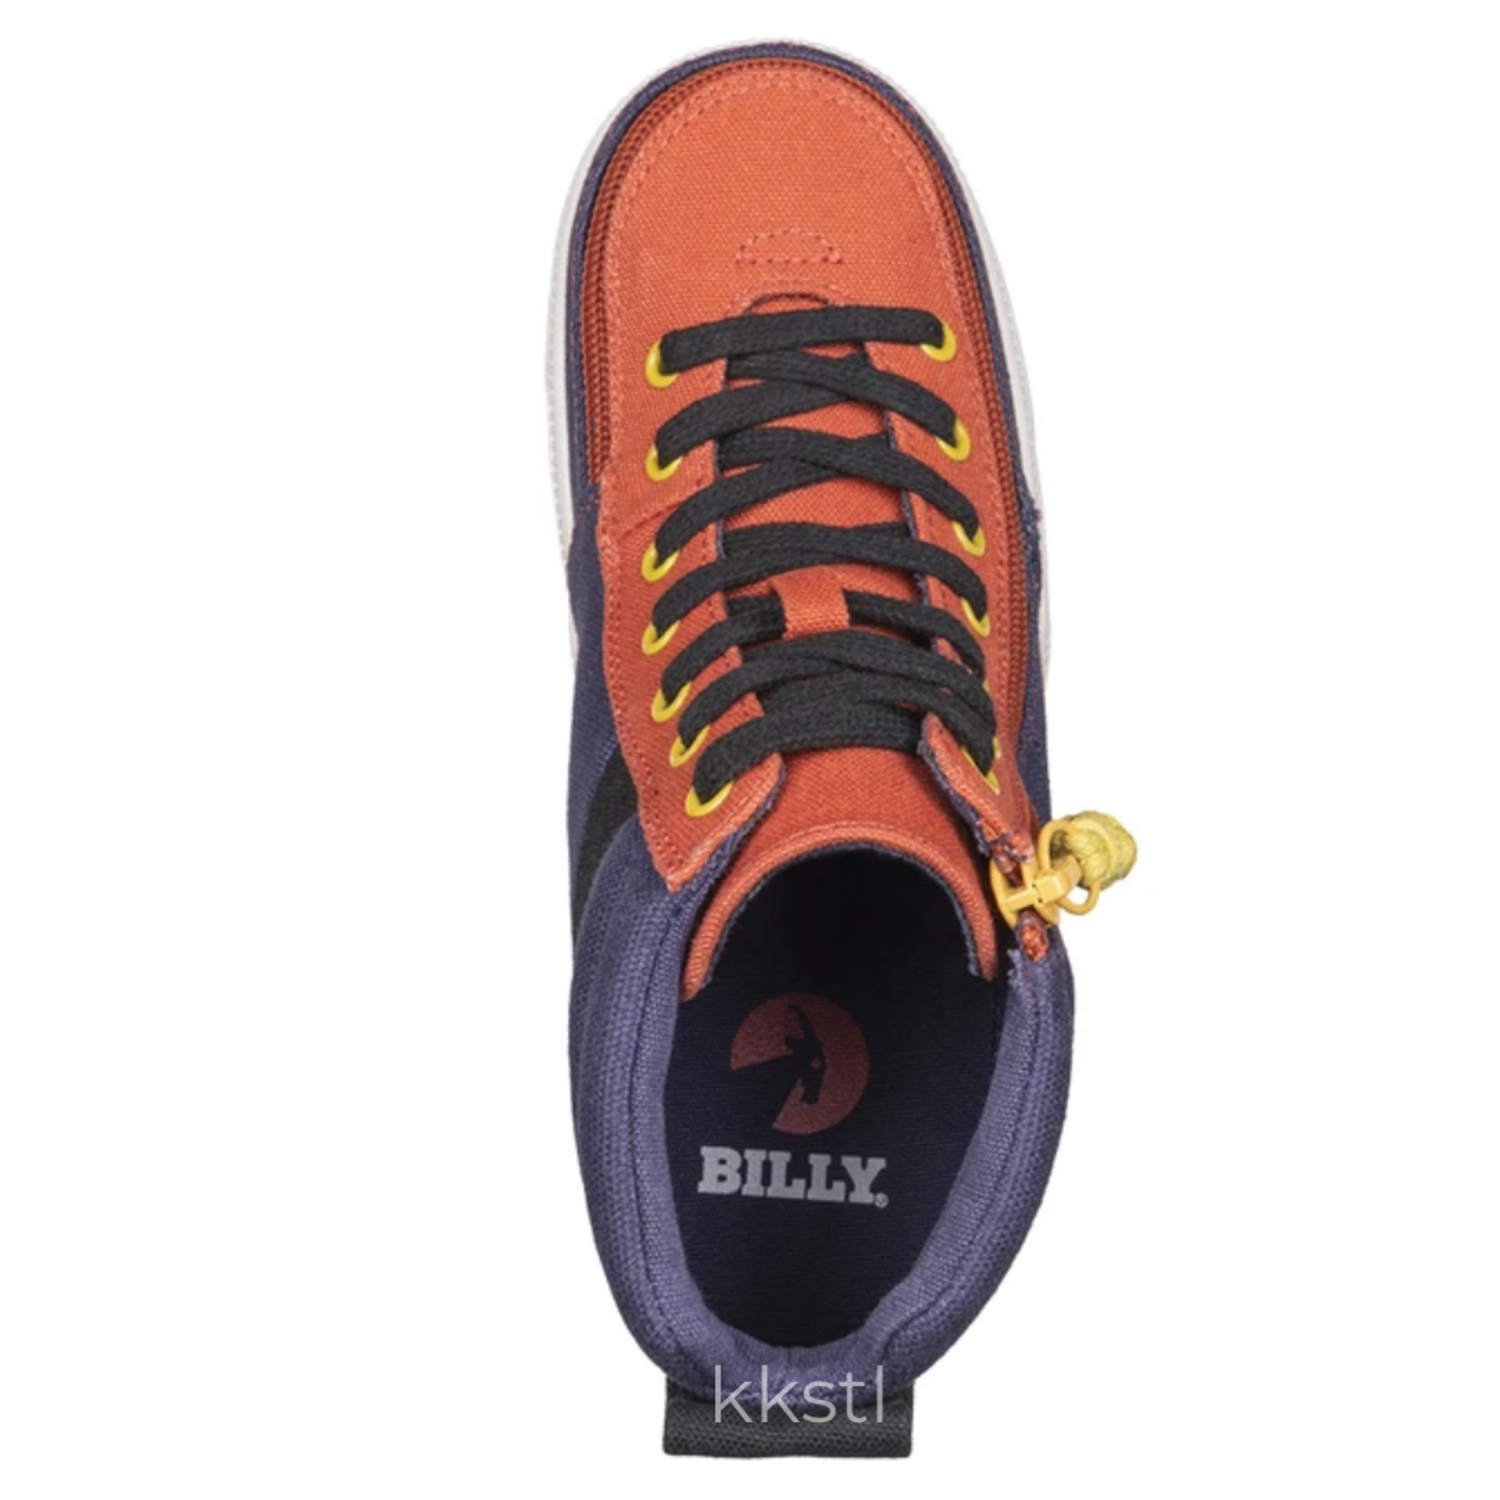  BILLY Footwear Kids Street Special O Sneakers for Little, and  Big Kids - Durable Insole Board, Lace-Up, and Zippered Closure Navy Tie-Dye  1 Little Kid M